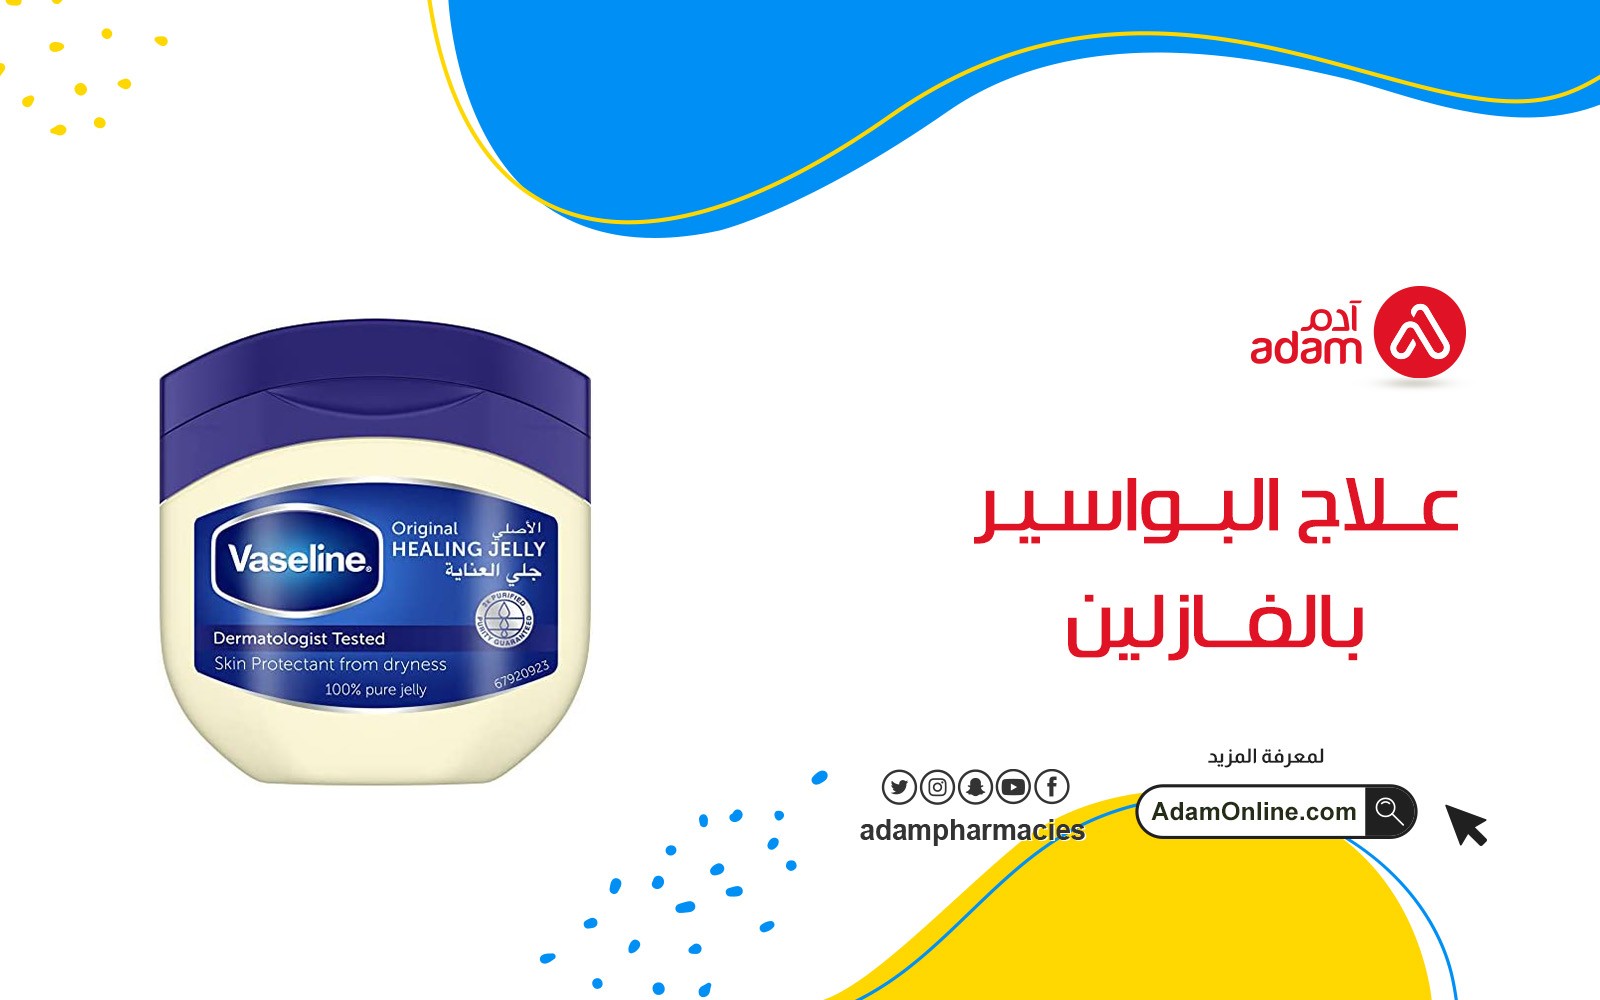 Treatment of hemorrhoids with petroleum jelly